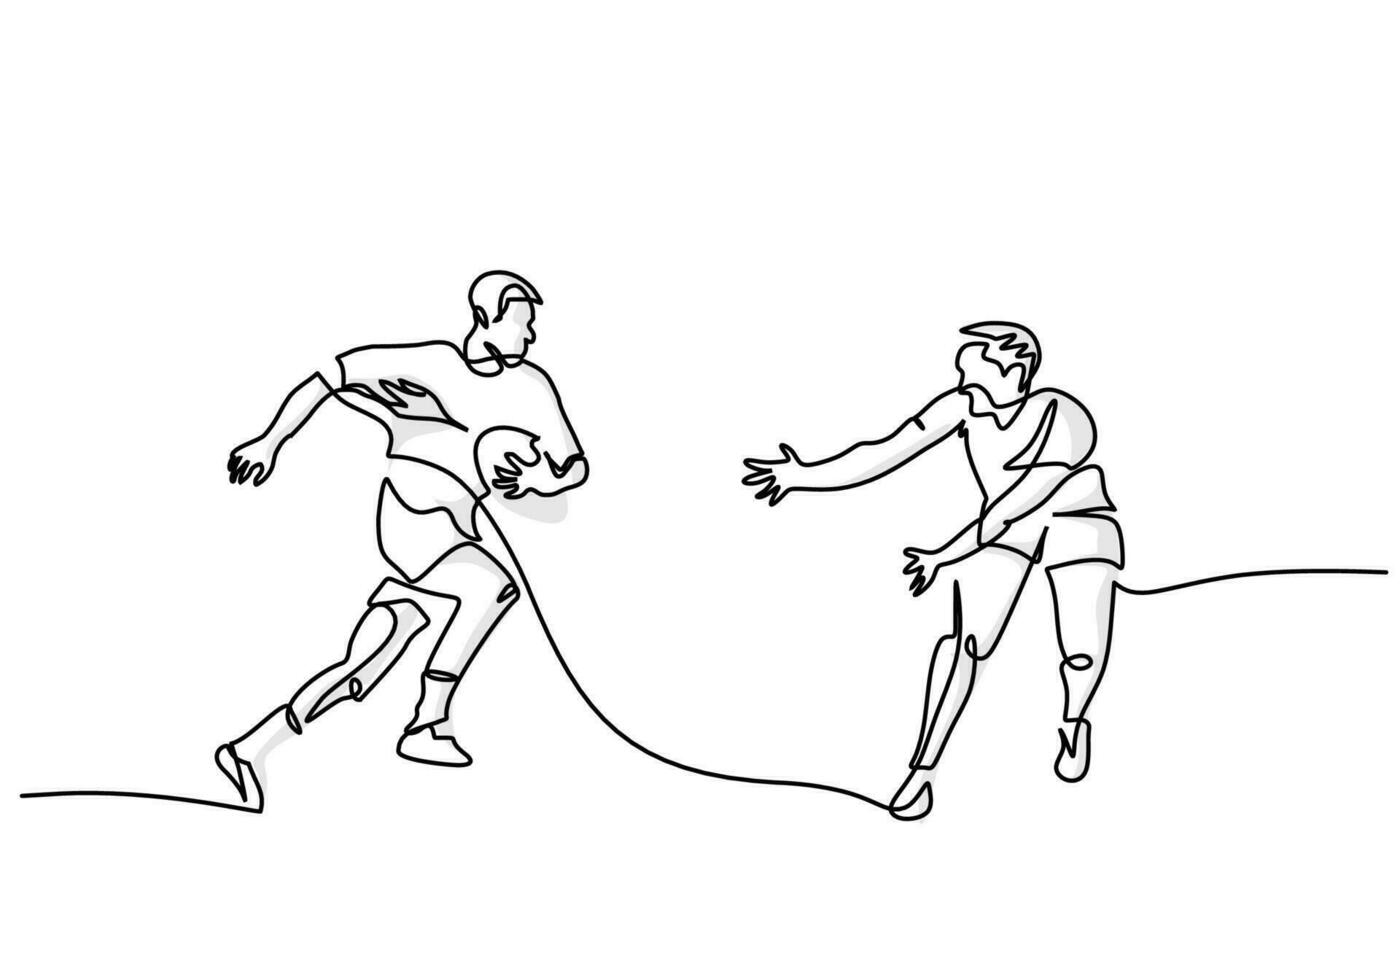 Rugby Player Simple One Line Art, Sports of Person Playing Rugby vector